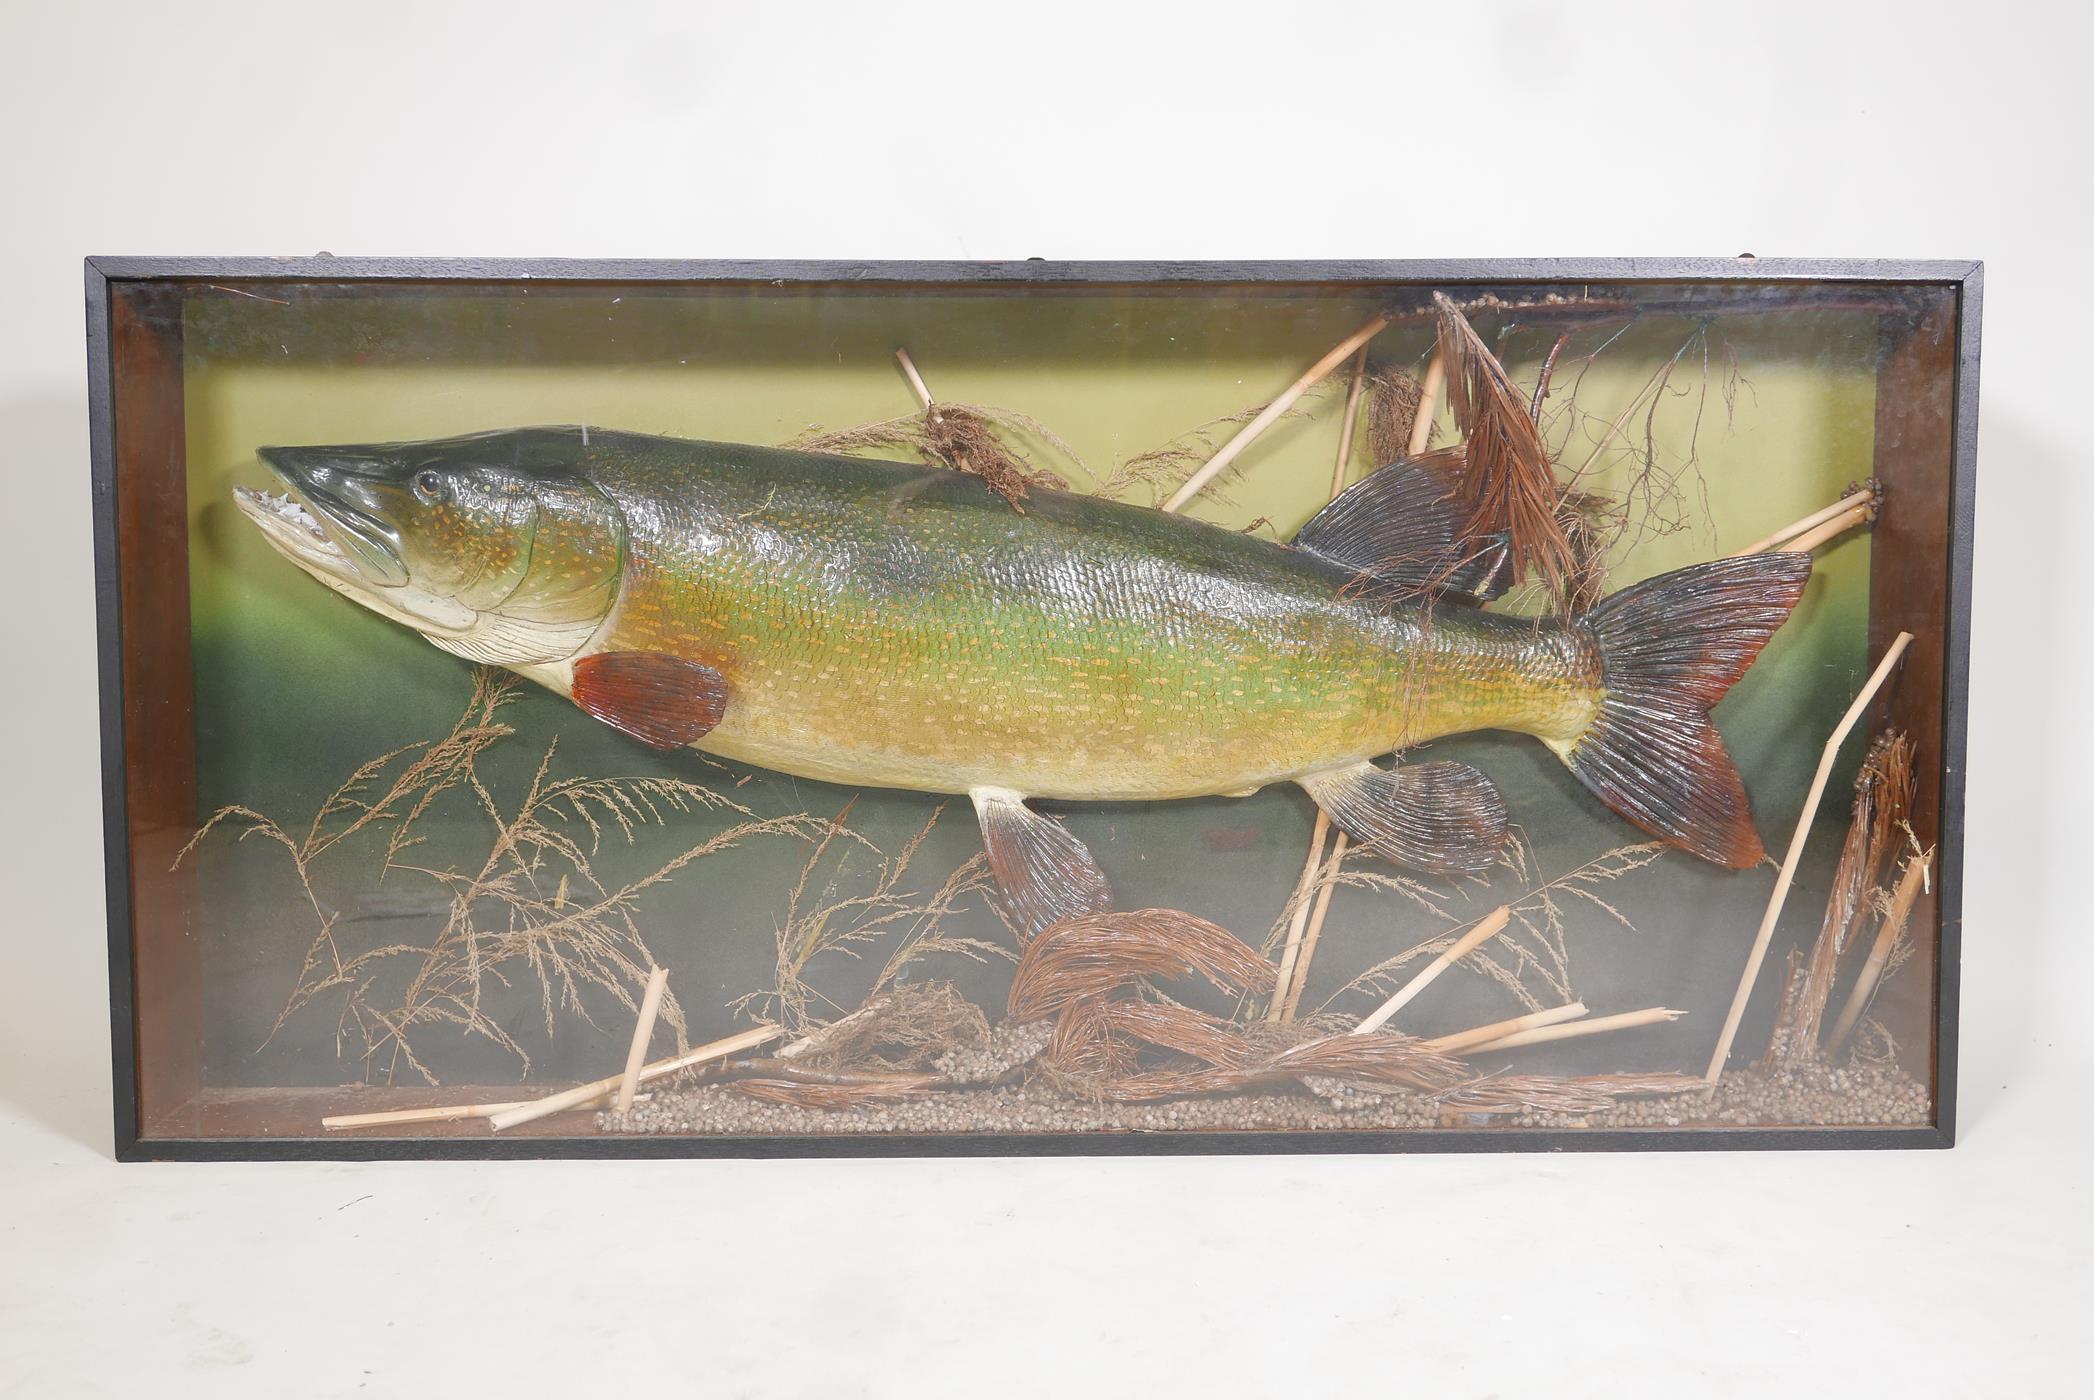 A composition model of a pike in a display case, 50" x 24"